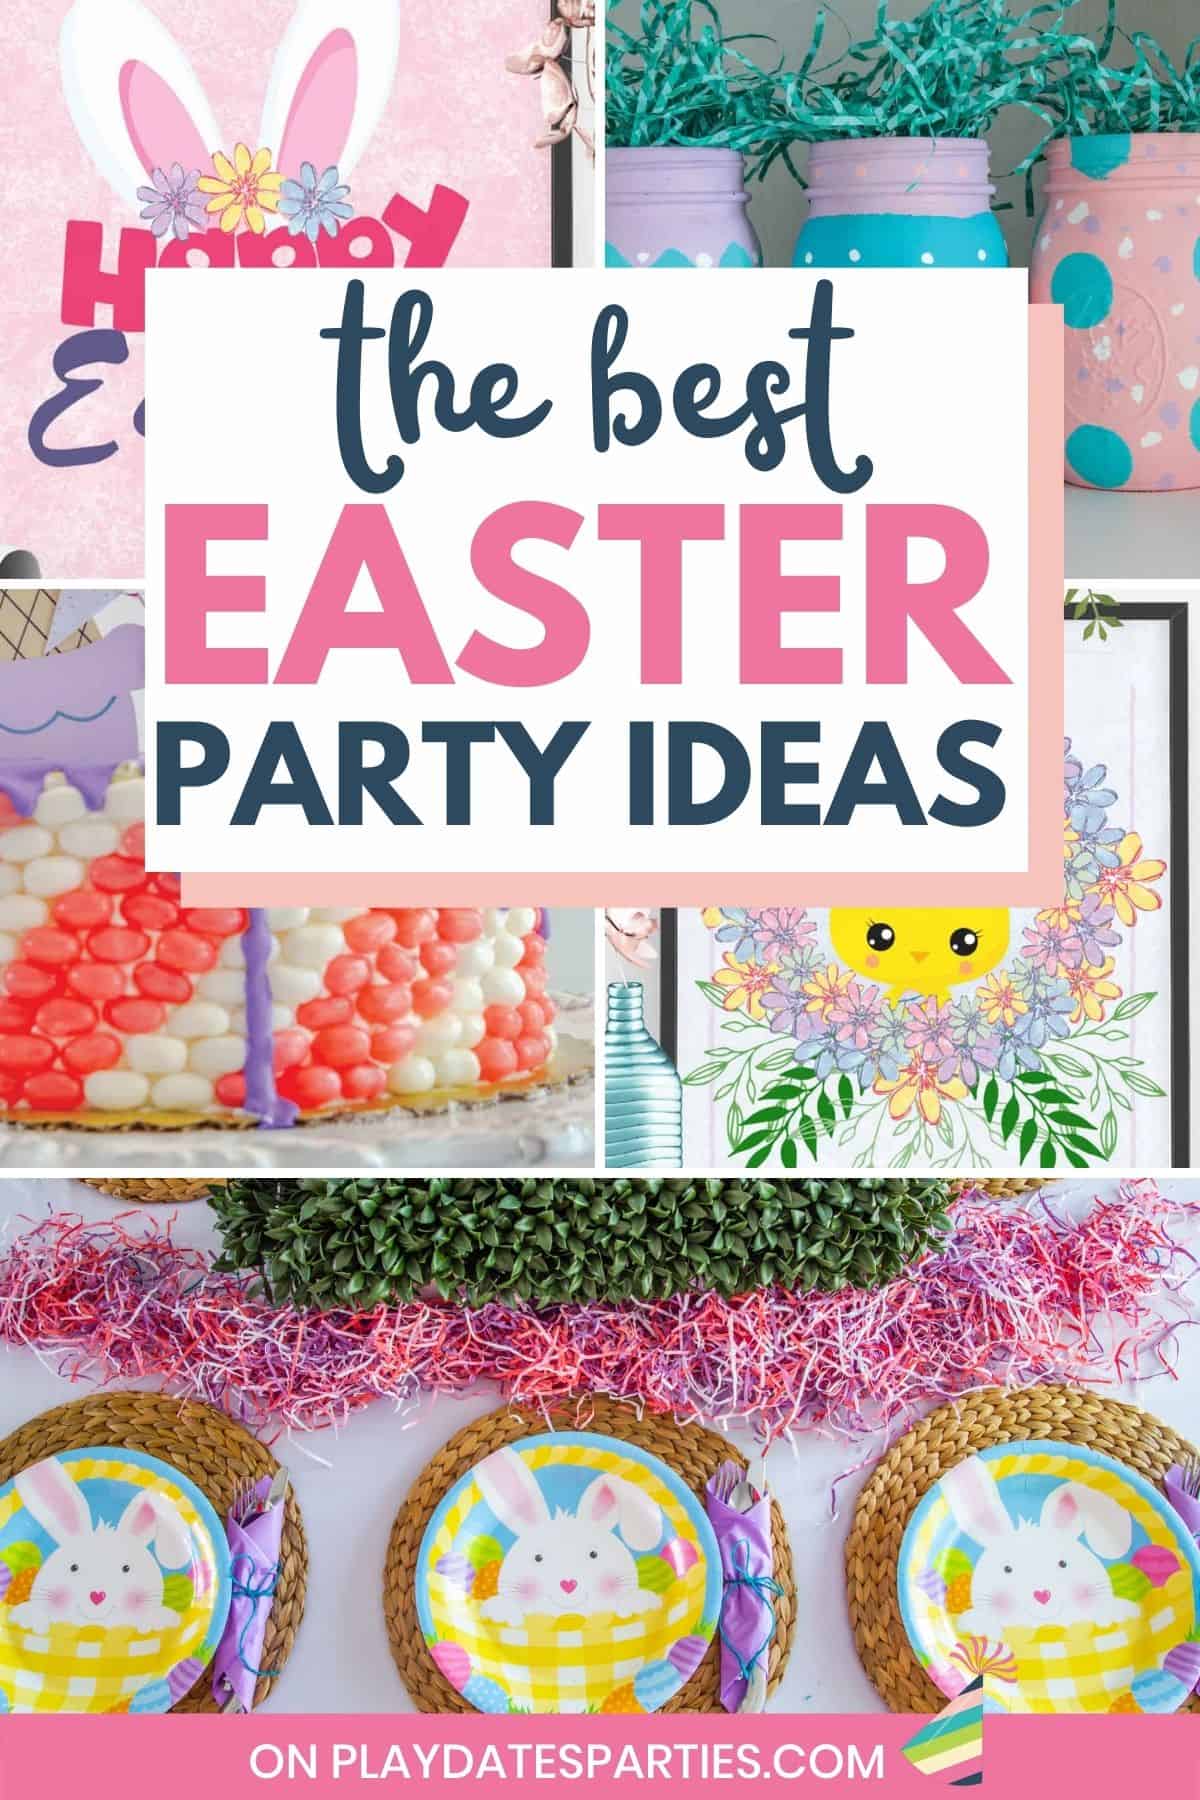 Collage of Easter food and decor with text overlay the best Easter party ideas.